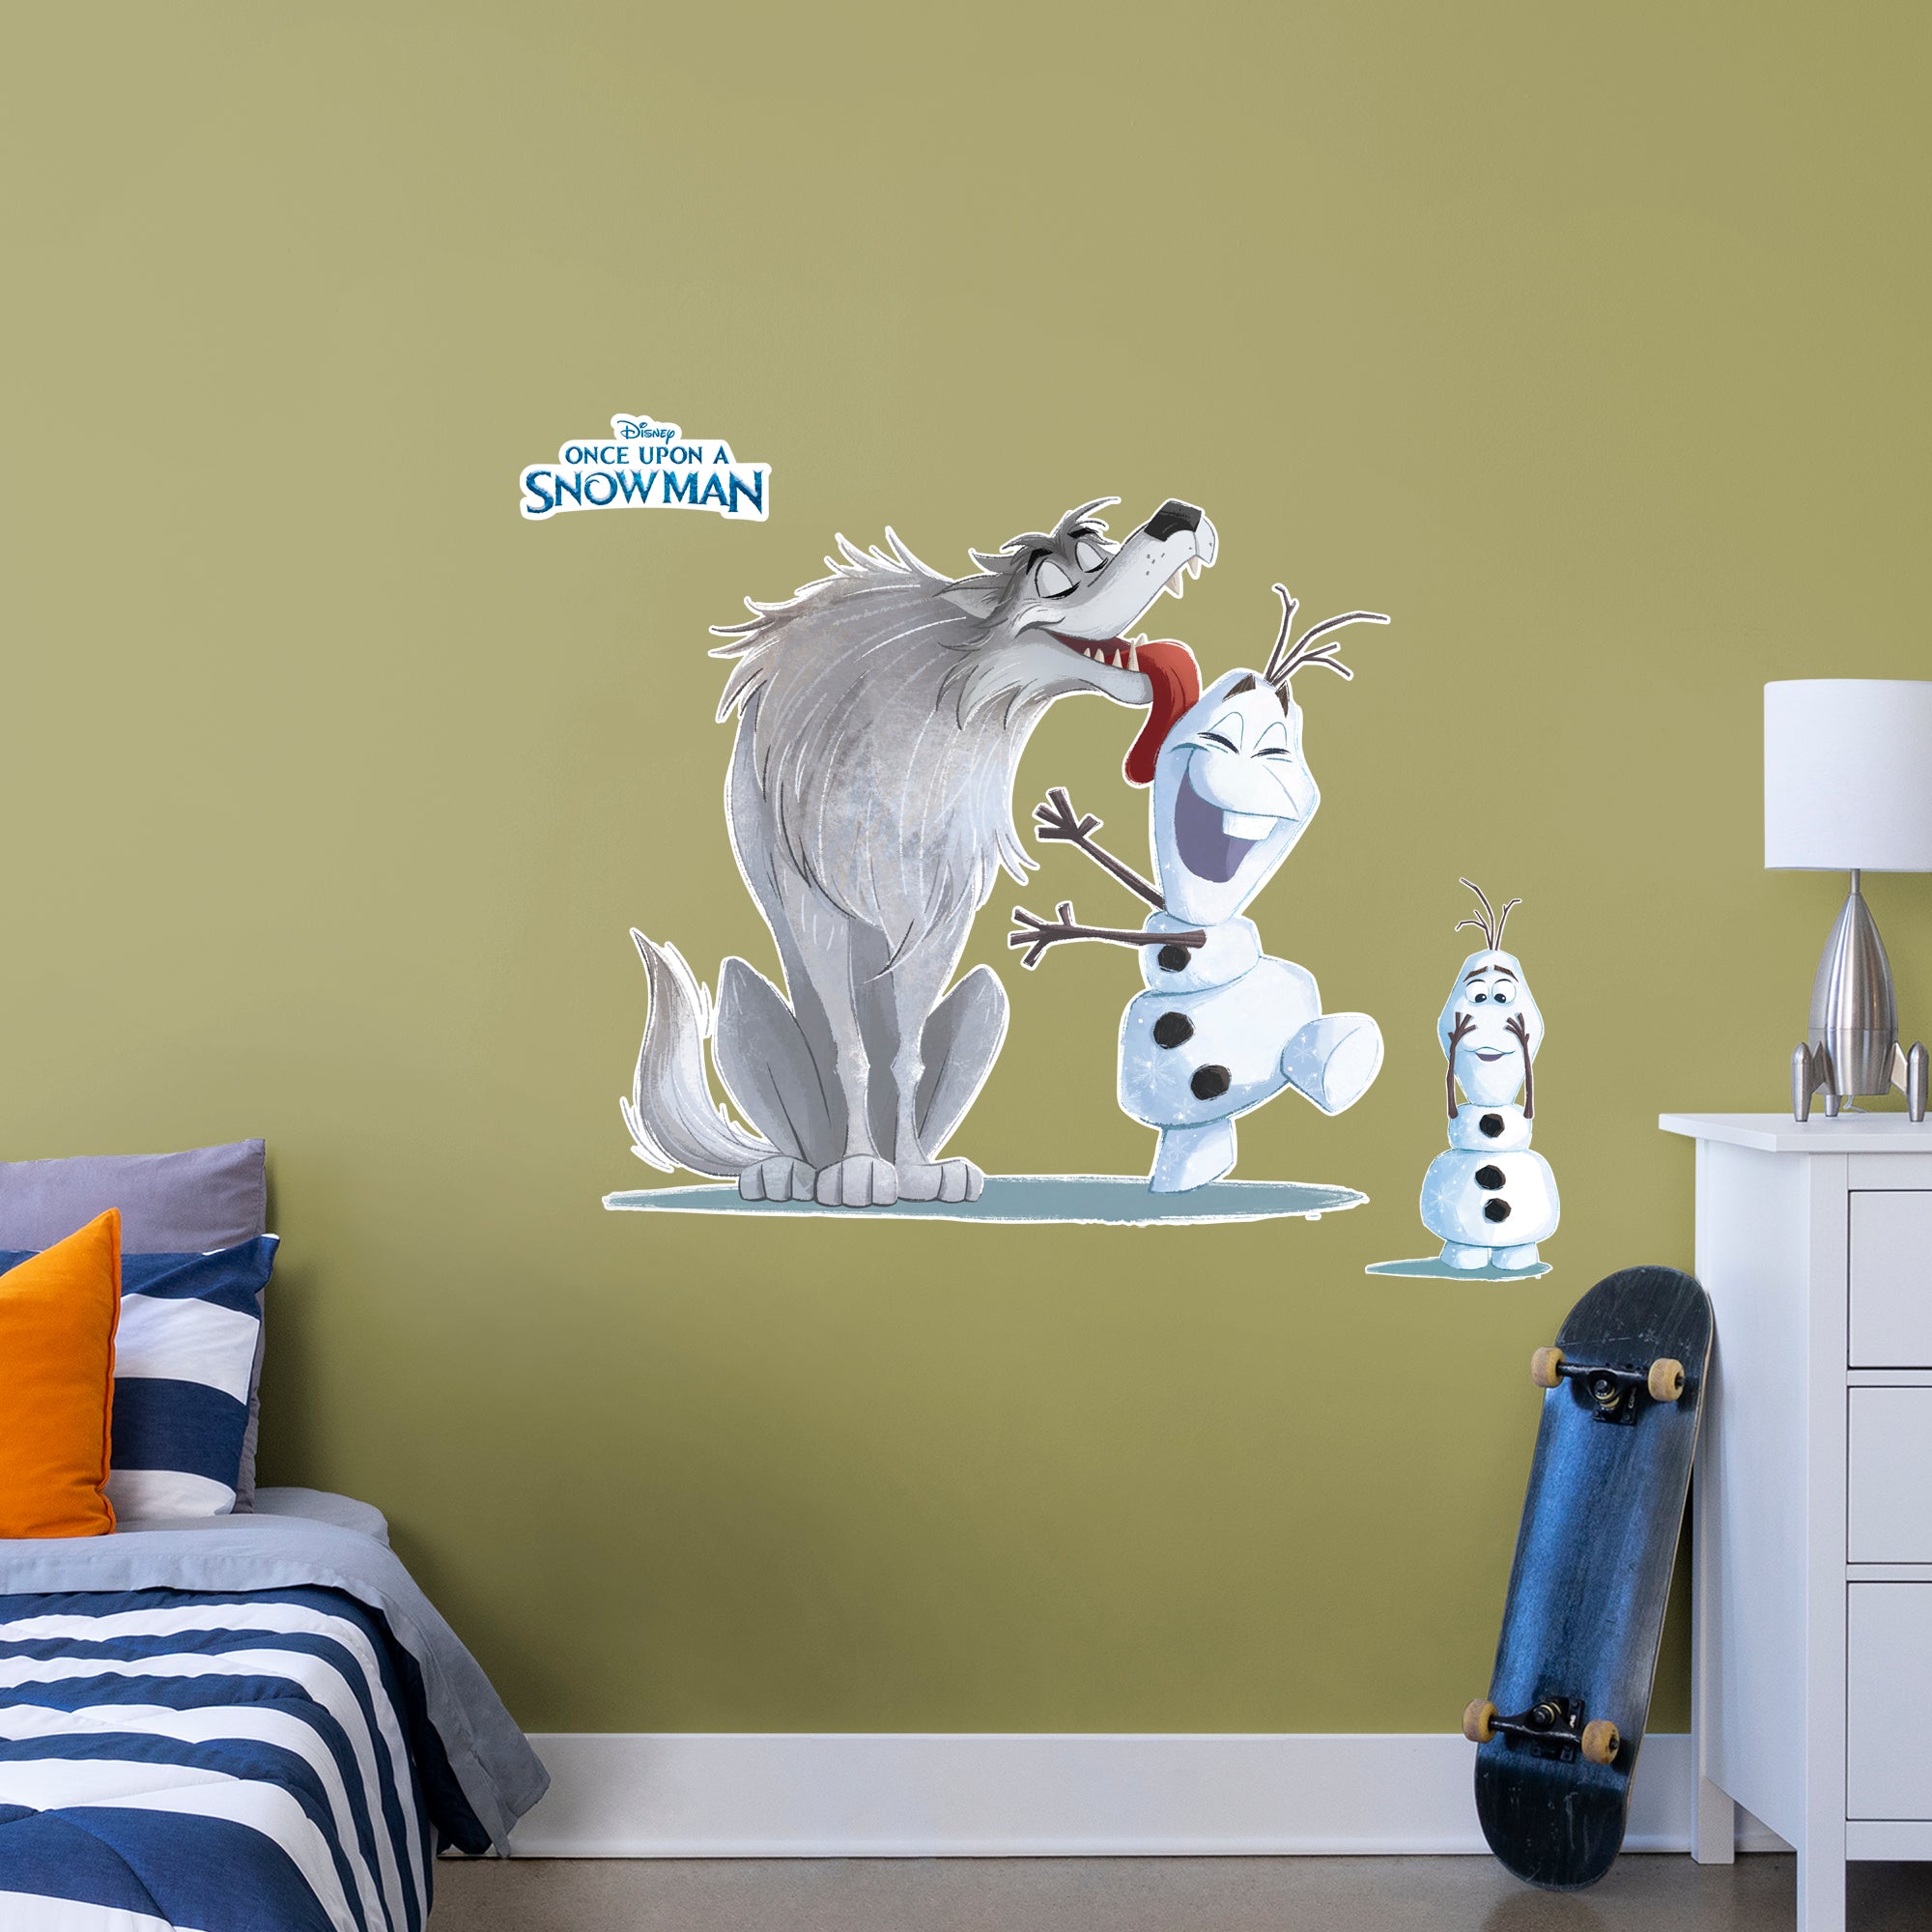 Olaf: Wolf - Once Upon A Snowman Officially Licensed Disney Removable Wall Decal Giant Character + 2 Decals by Fathead | Vinyl